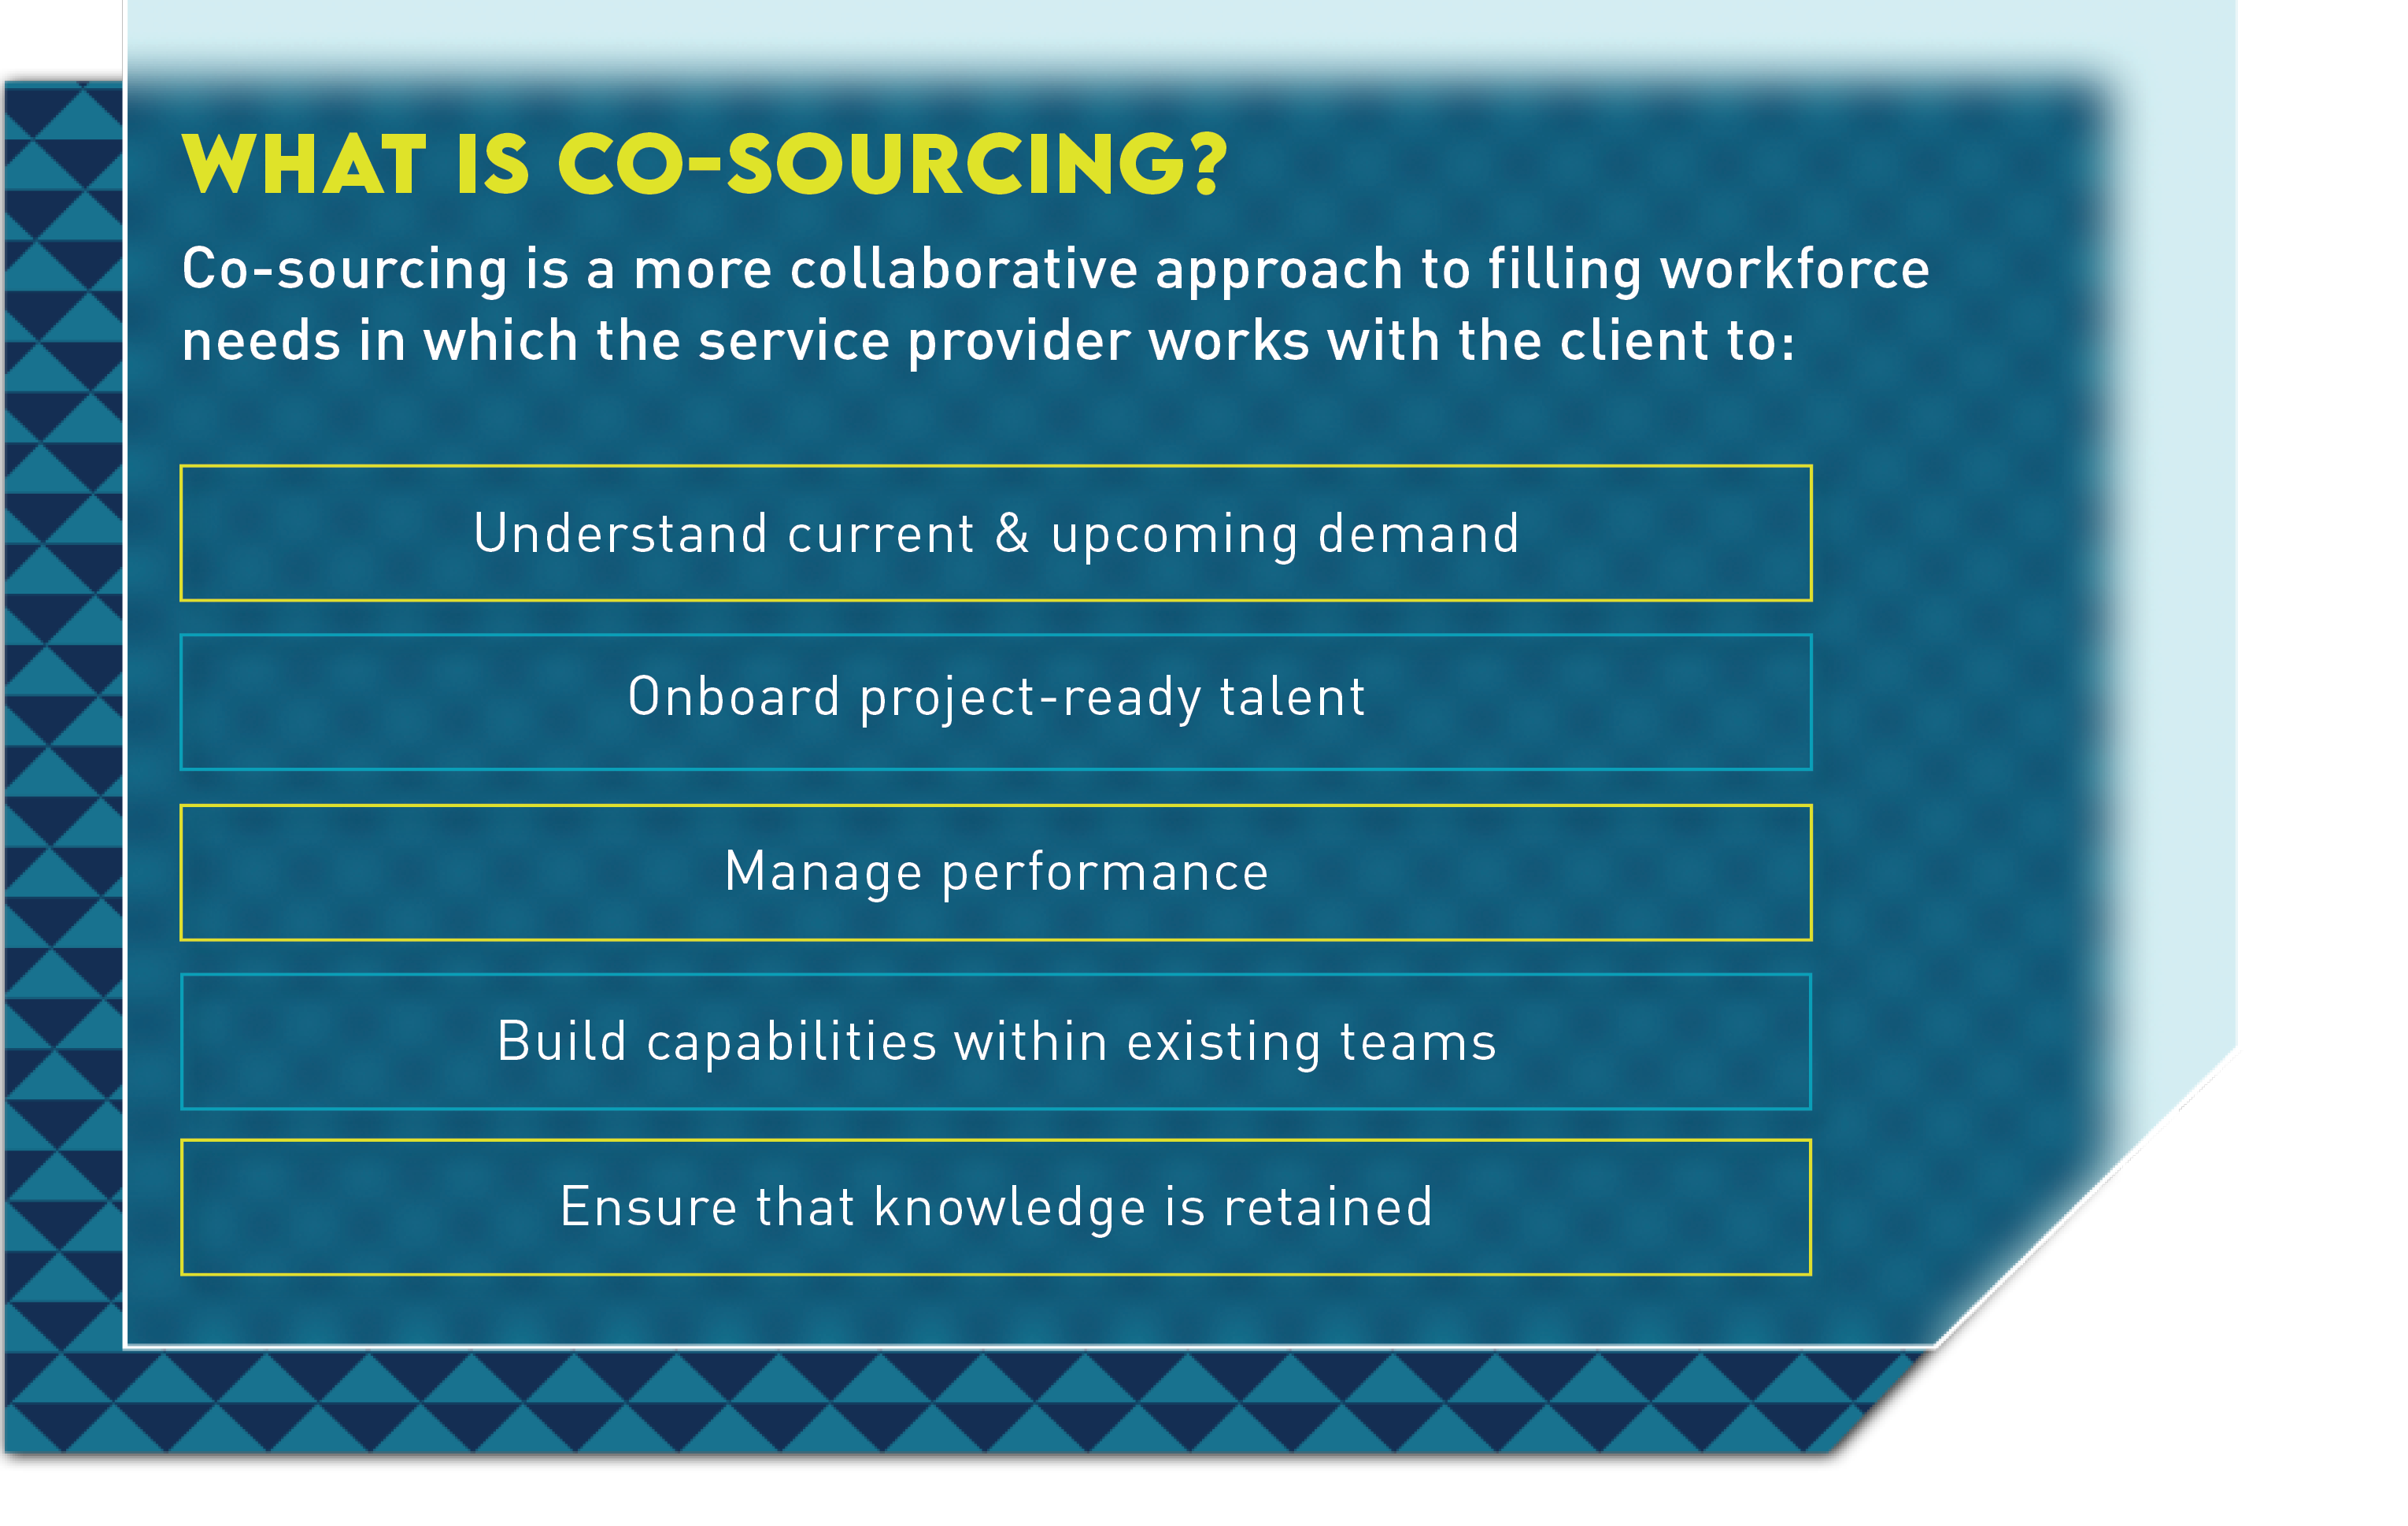 What is CoSourcing?